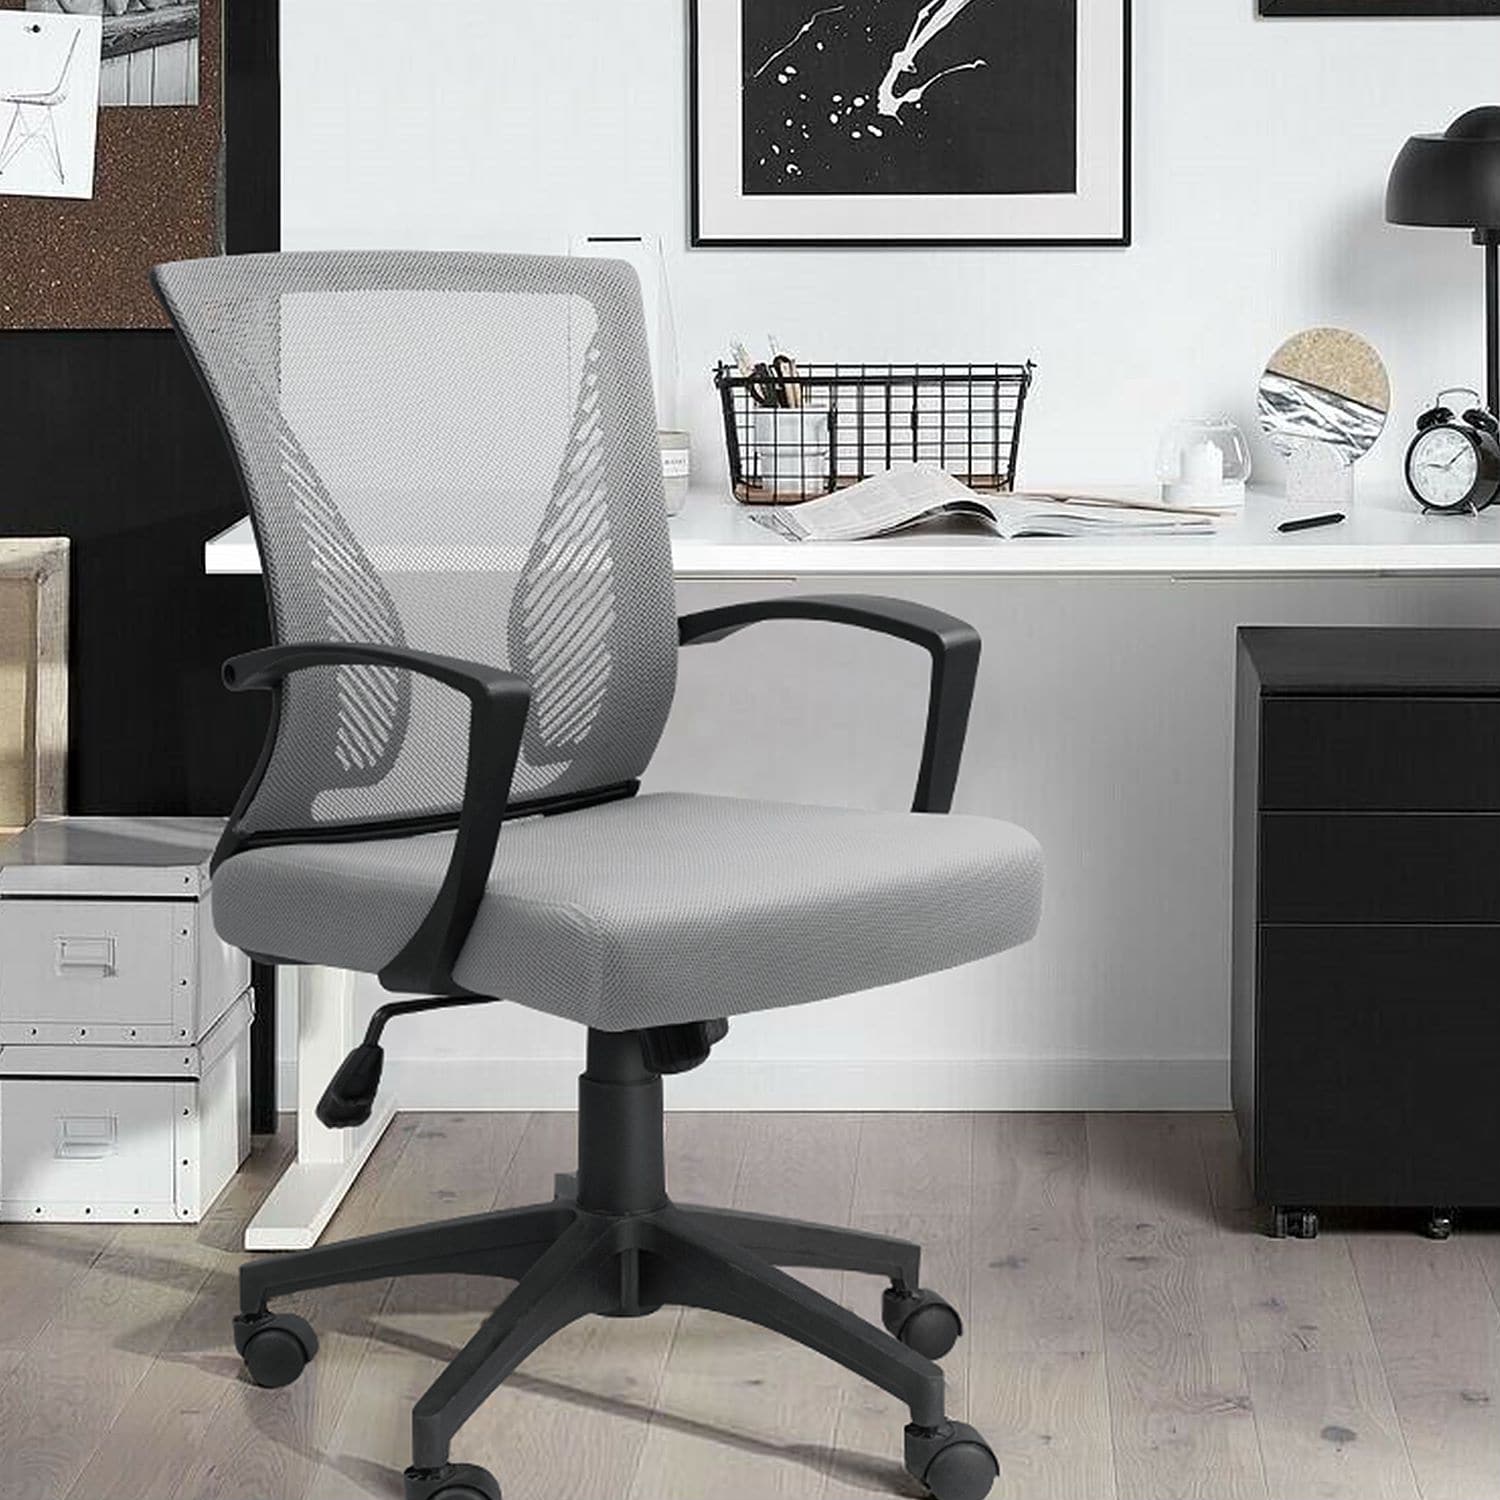 https://ak1.ostkcdn.com/images/products/is/images/direct/d6ebbc1fb8f5b84c652e0a6c7bccca29e6249291/Office-Chair-Mid-Back-Swivel-Lumbar-Support-Desk-Chair%2C-Computer-Ergonomic-Mesh-Chair-with-Armrest.jpg